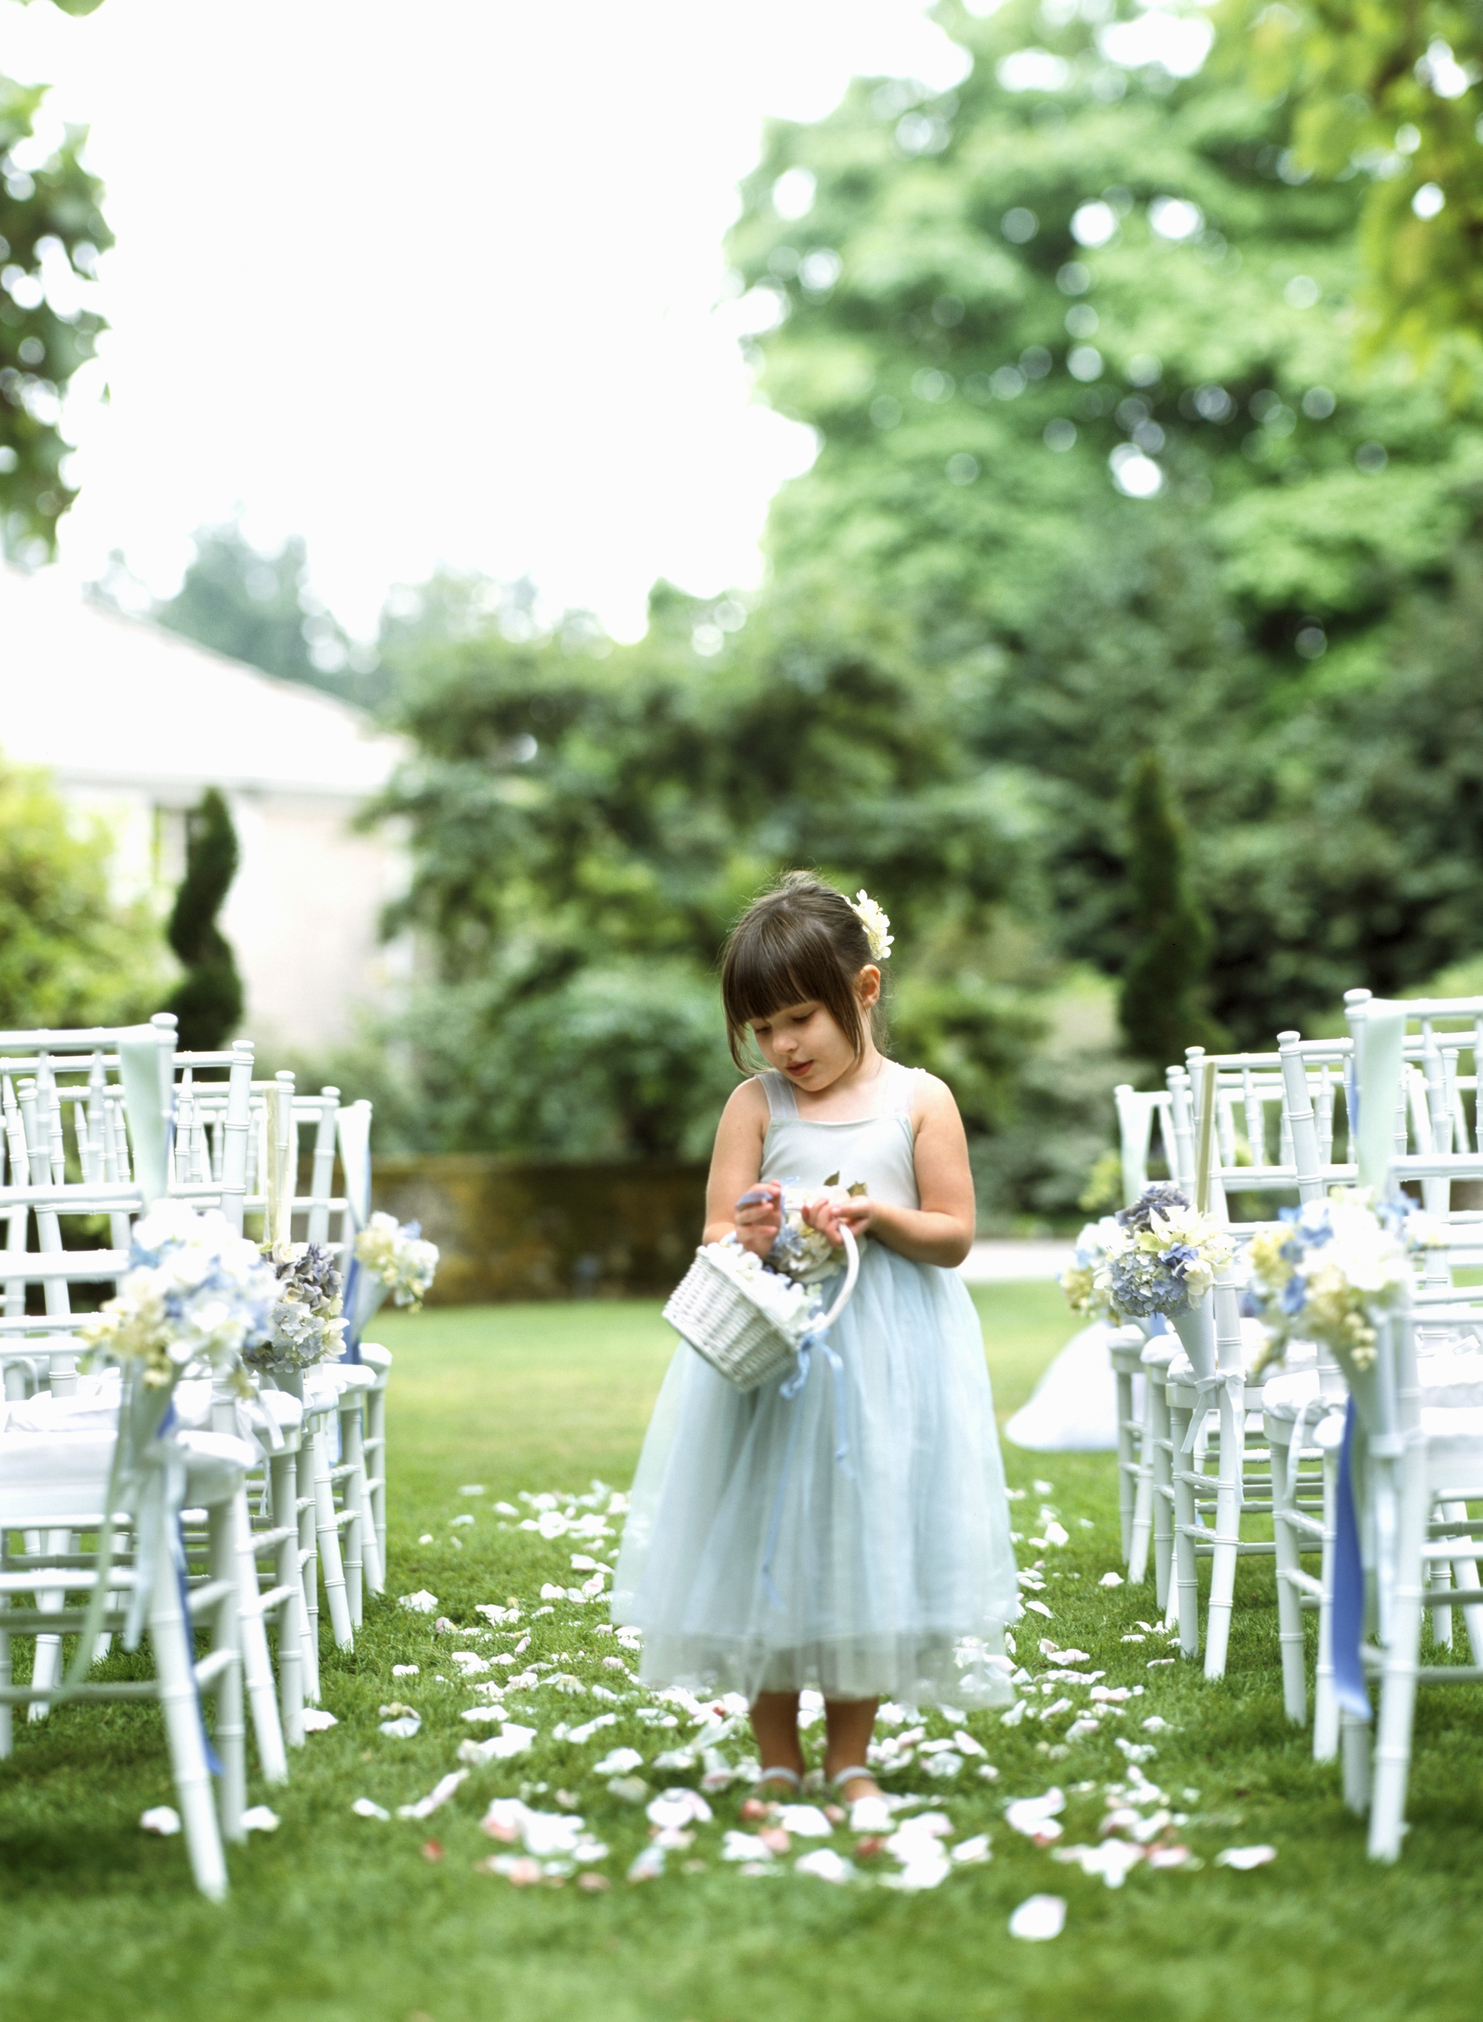 A little girl throwing flowers on the ground at a wedding